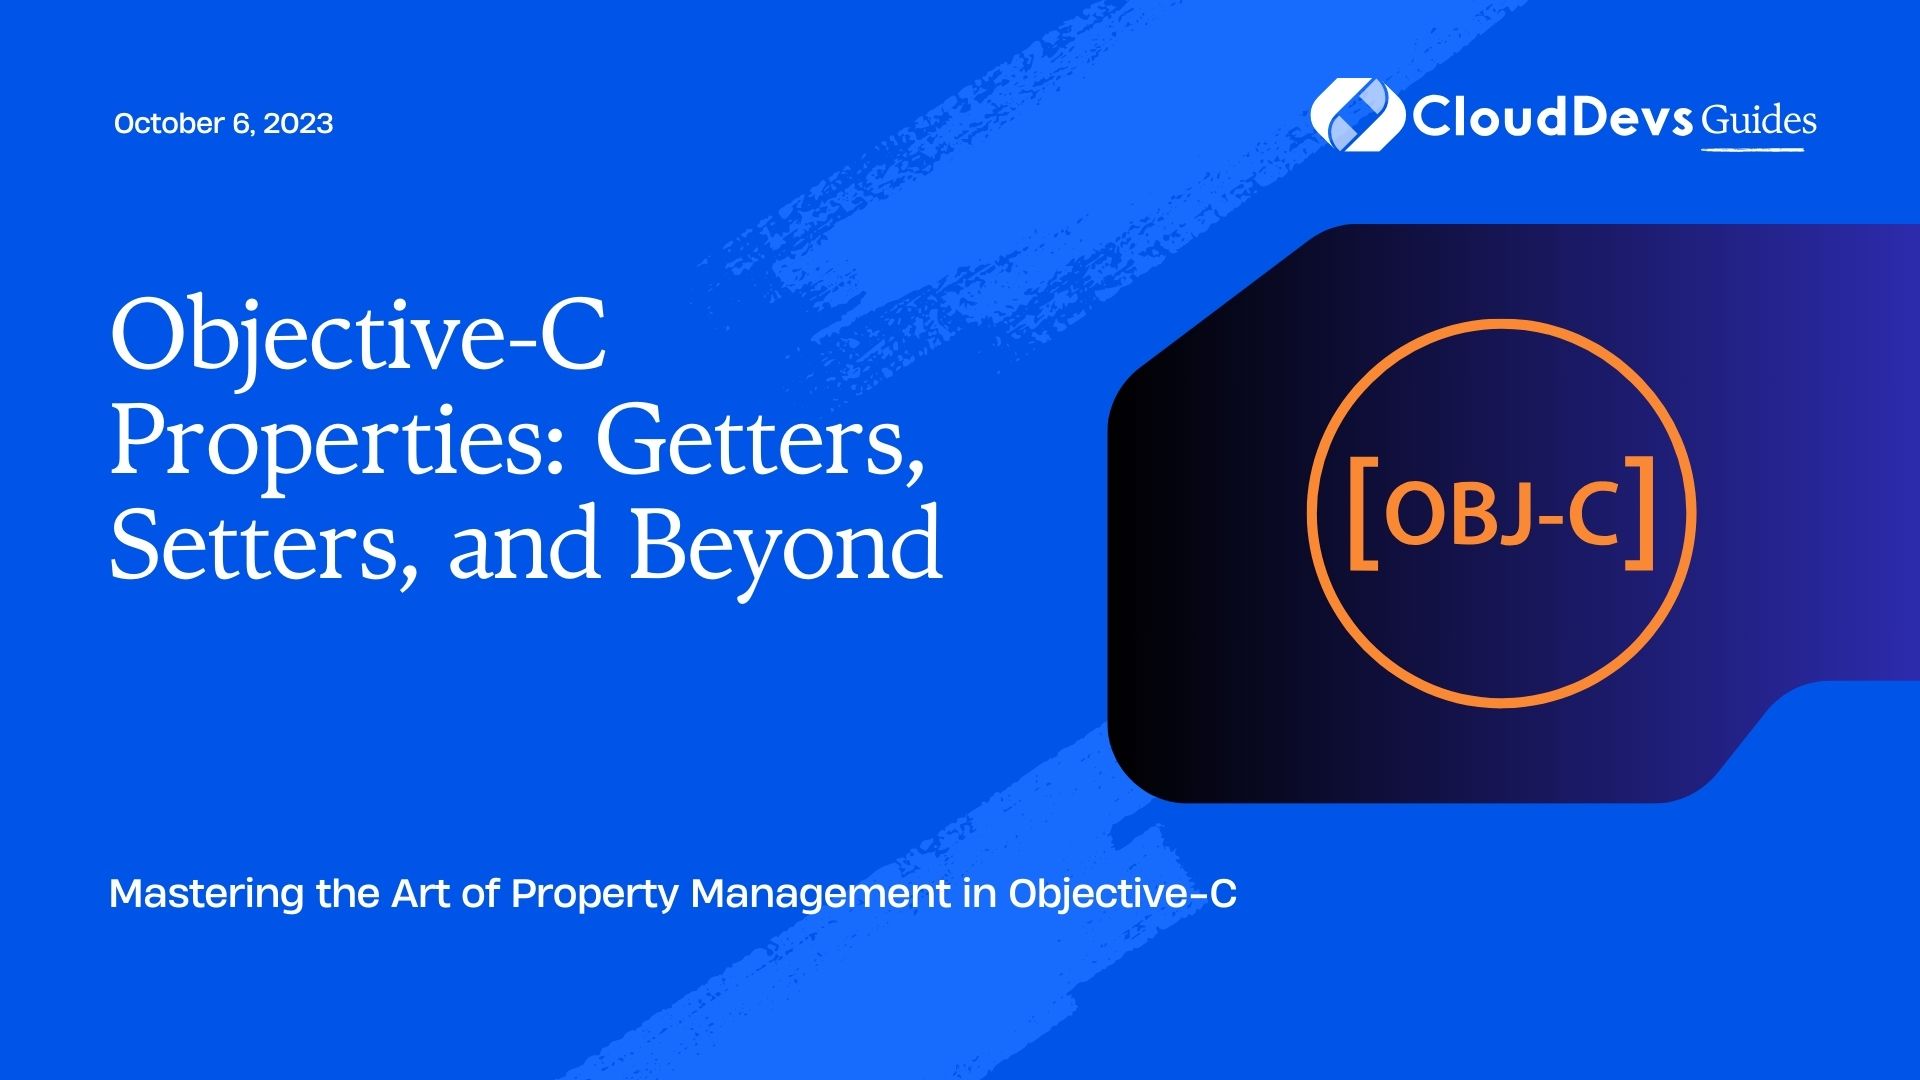 Objective-C Properties: Getters, Setters, and Beyond